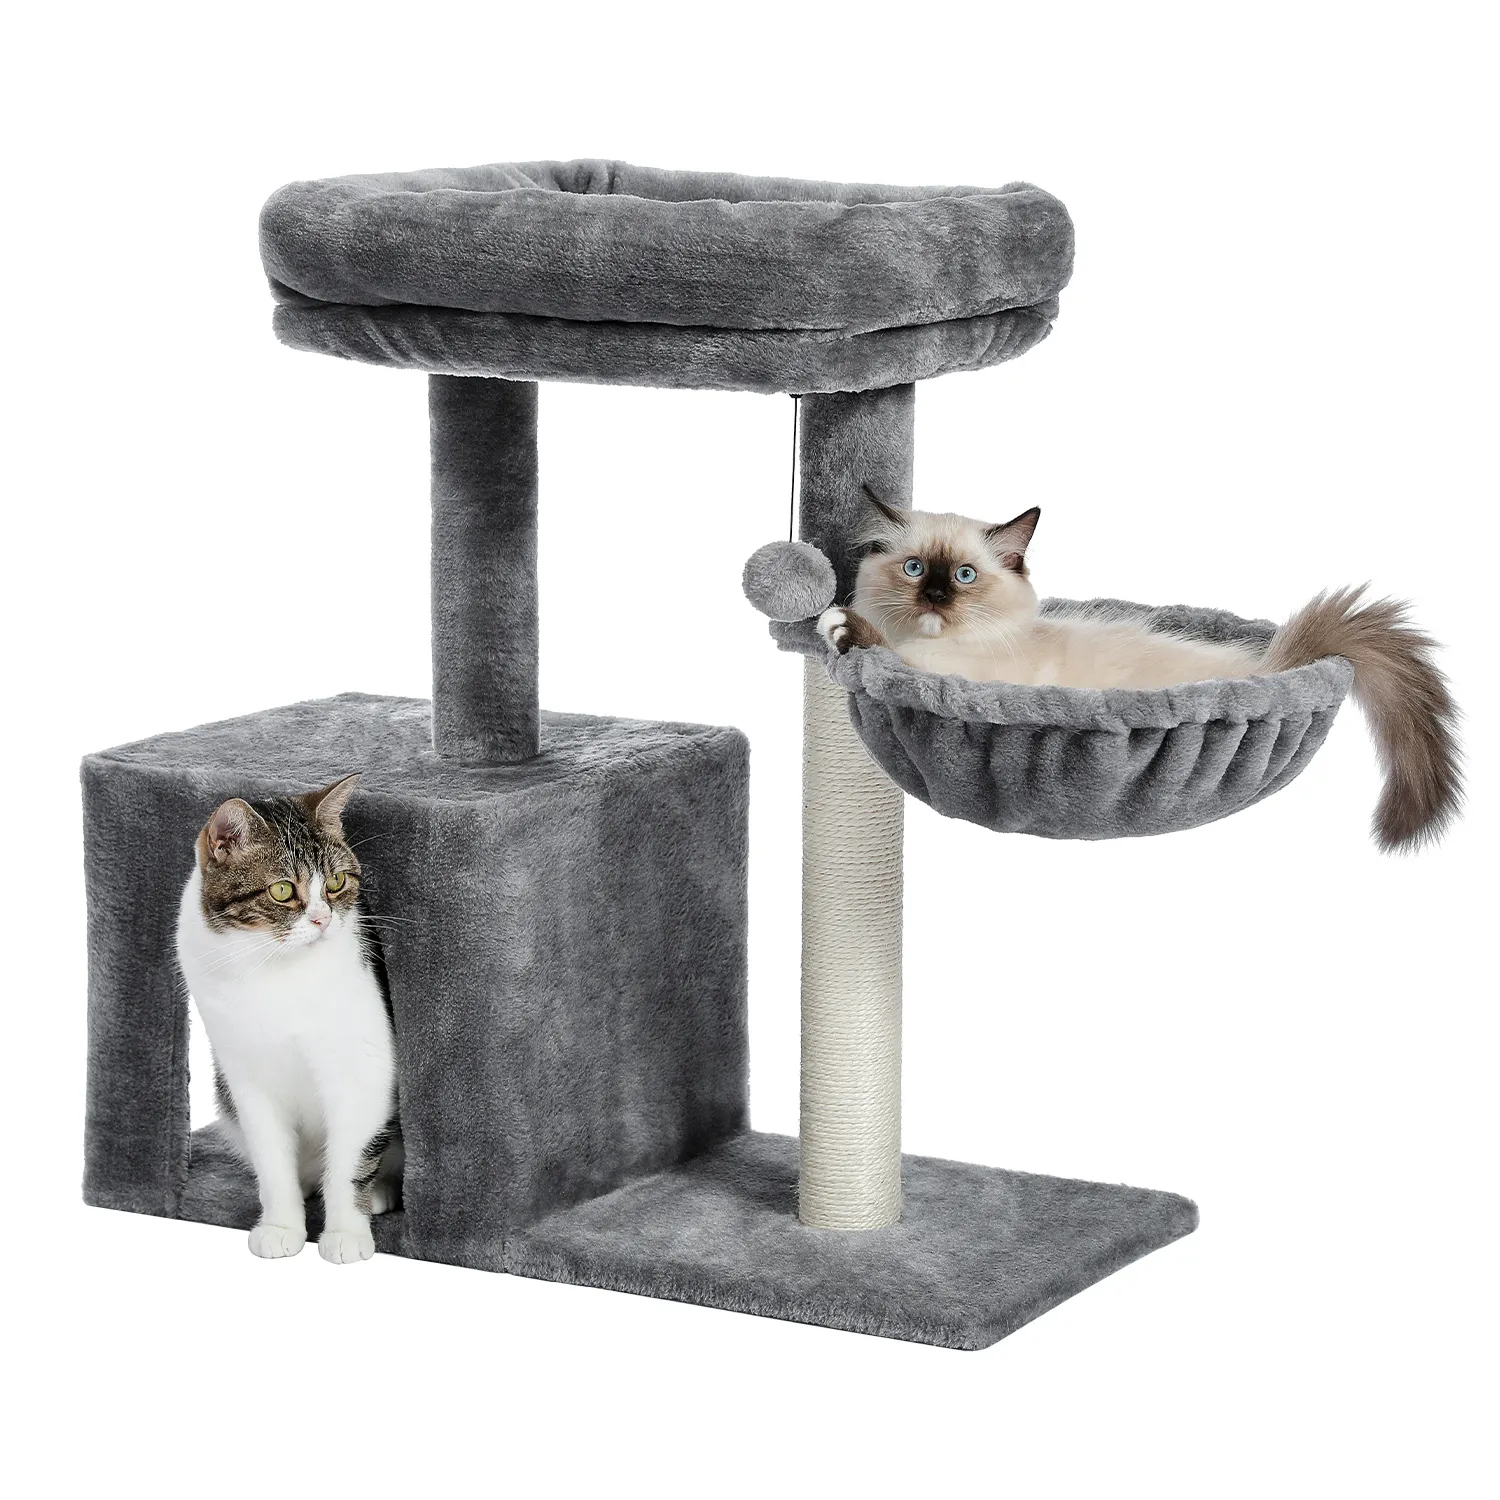 H70CM/80CM Small Cat Tree Condo with Natural Sisal-Covered Scratching Post for Kitten Cat Indoor Large Top Perch Cozy Hummock